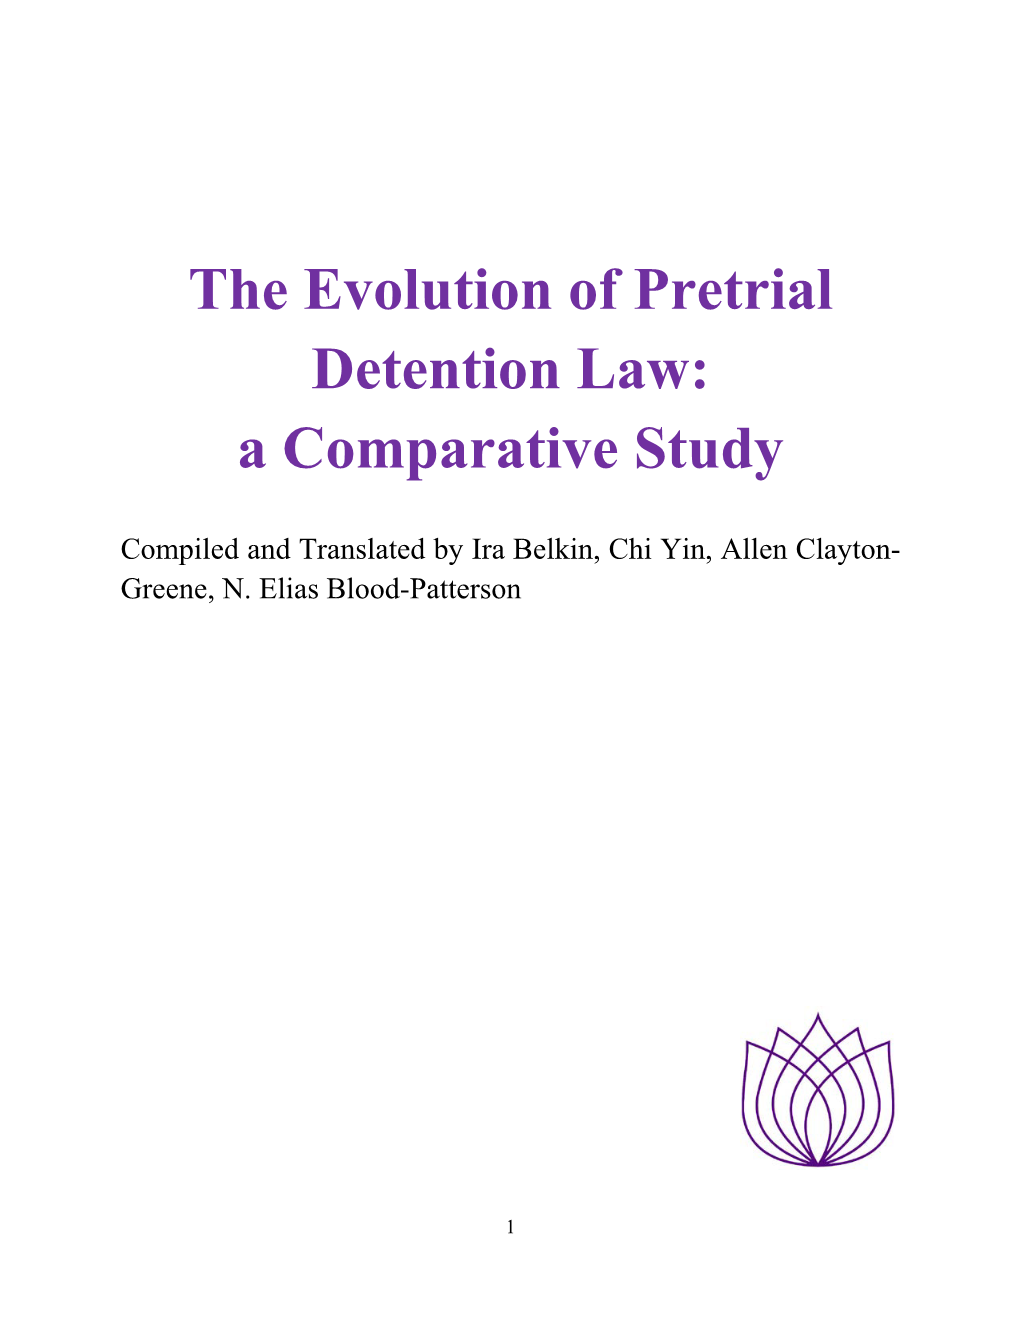 The Evolution of Pretrial Detention Law: a Comparative Study